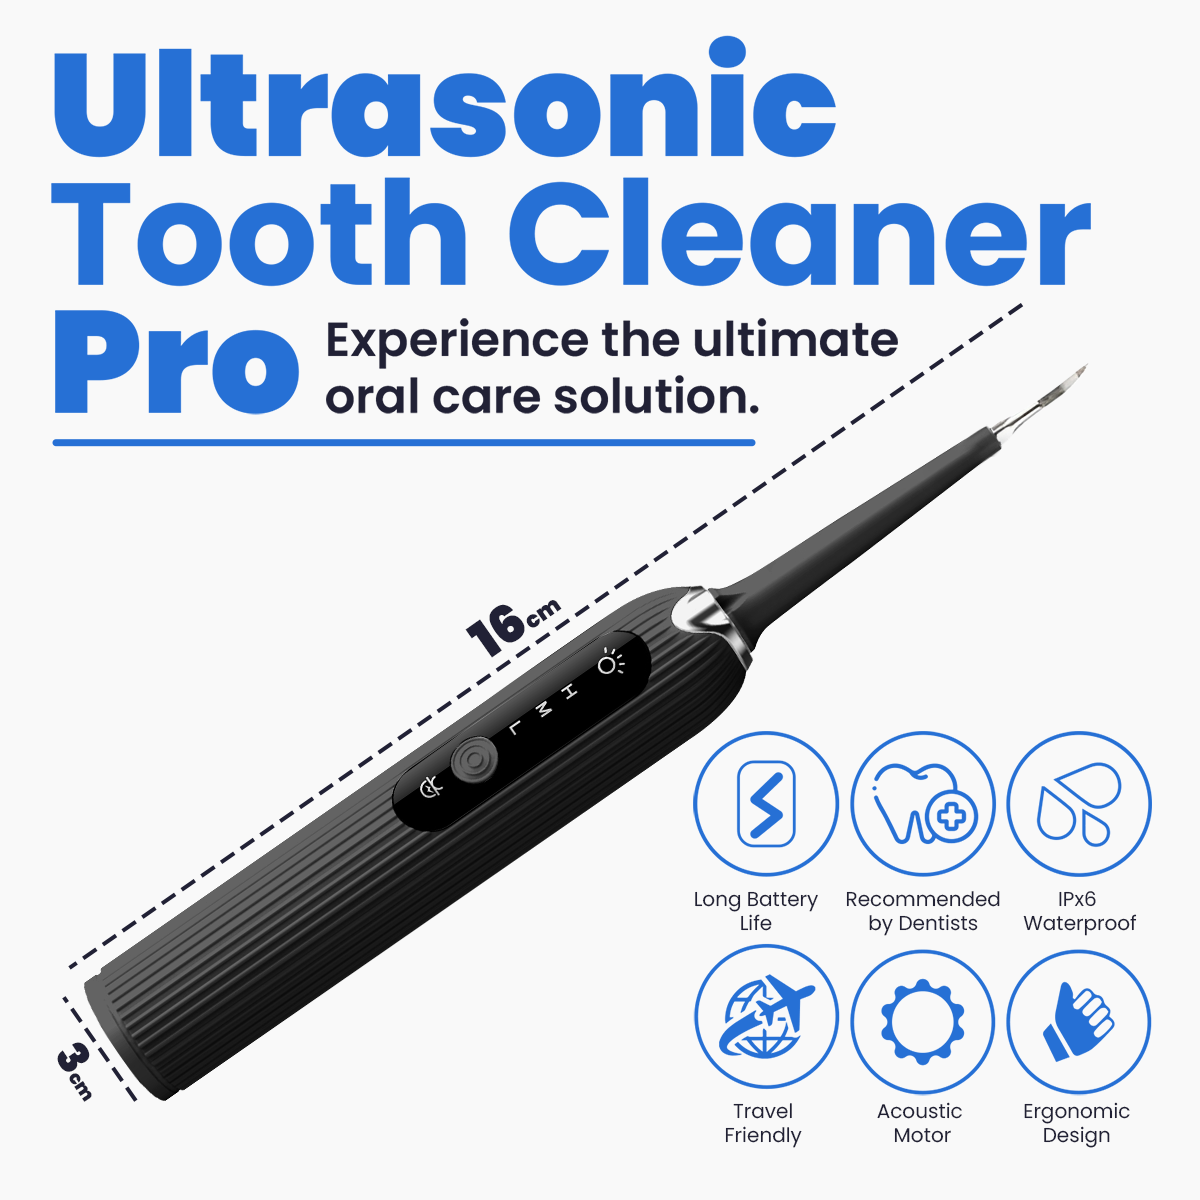 Ultrasonic Tooth Cleaner Pro DP10